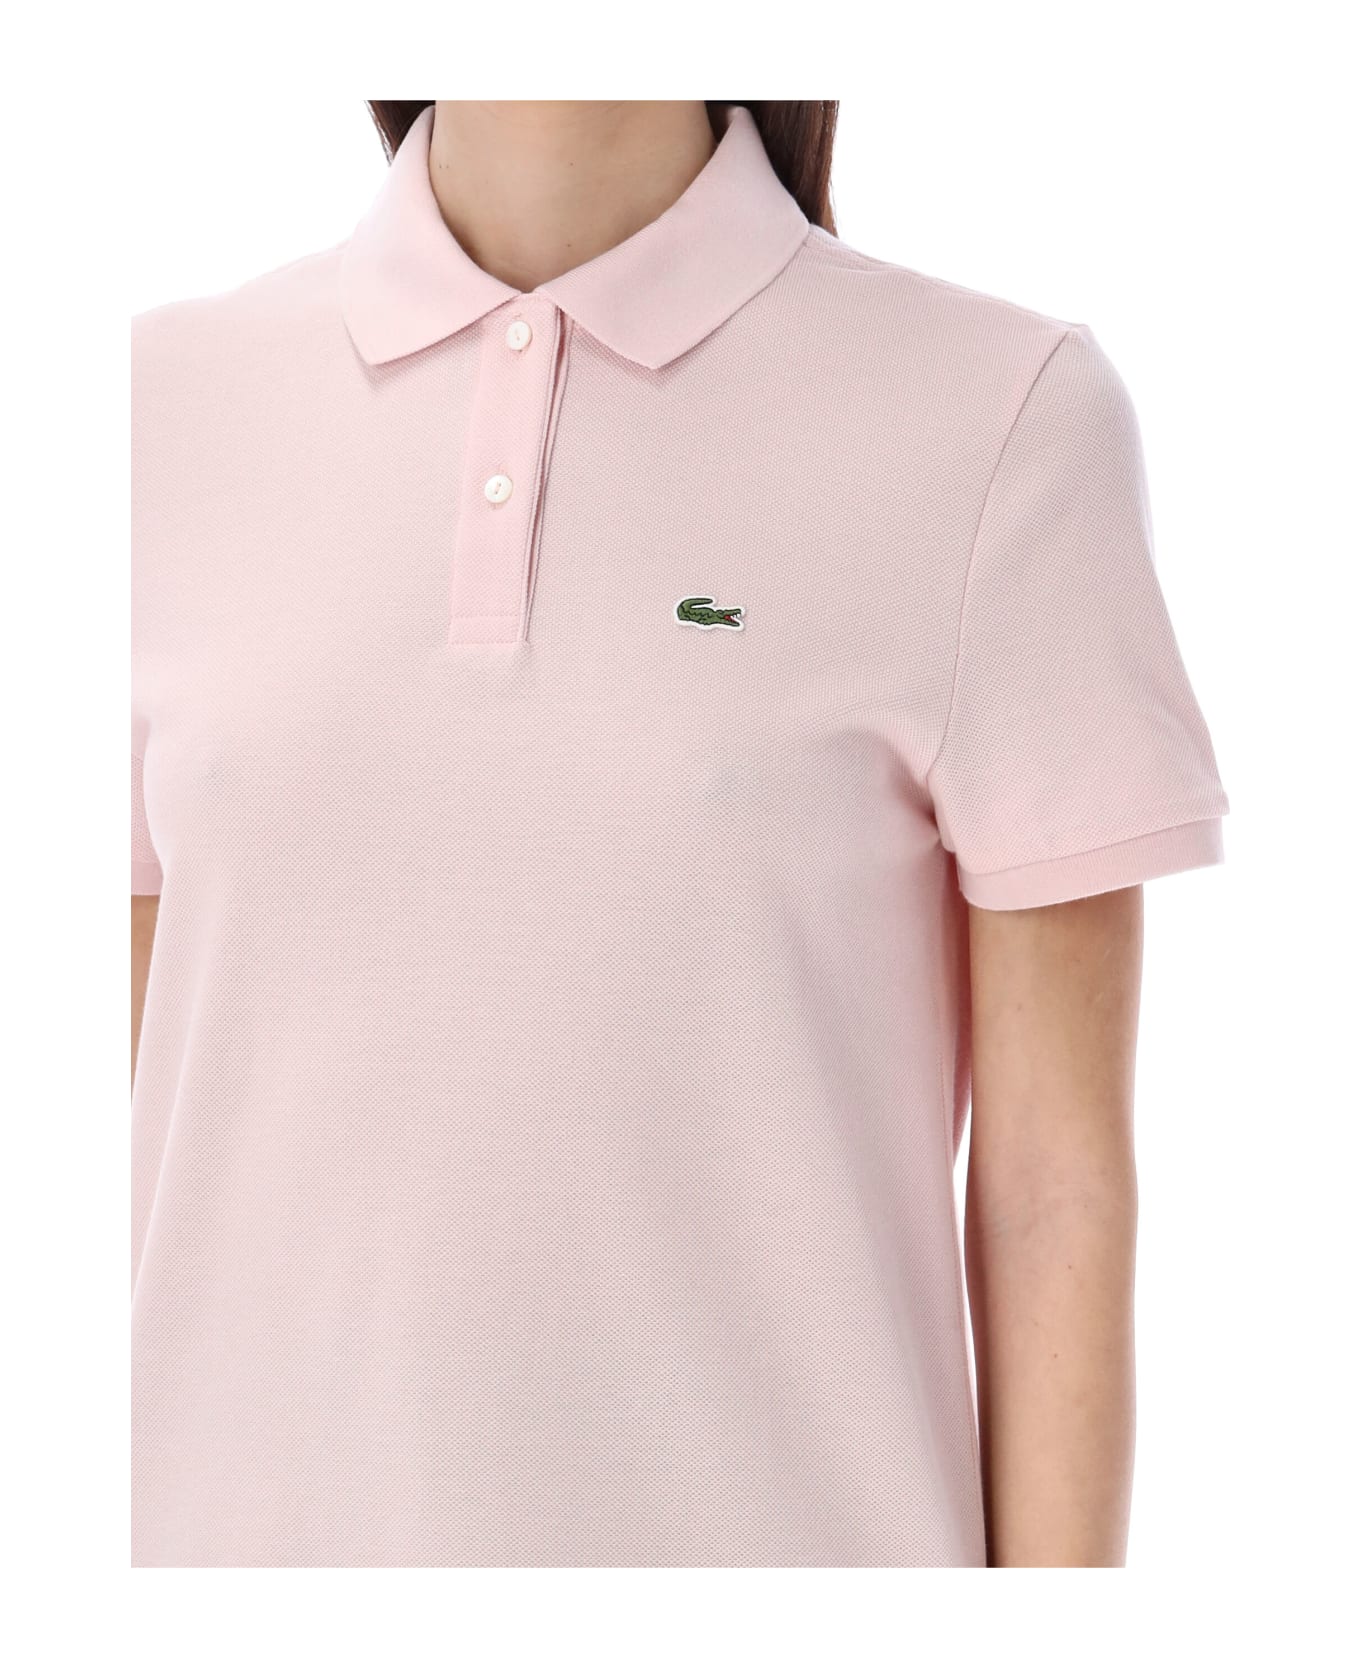 Lacoste Classic Polo Shirt - NIDUS PINK ポロシャツ